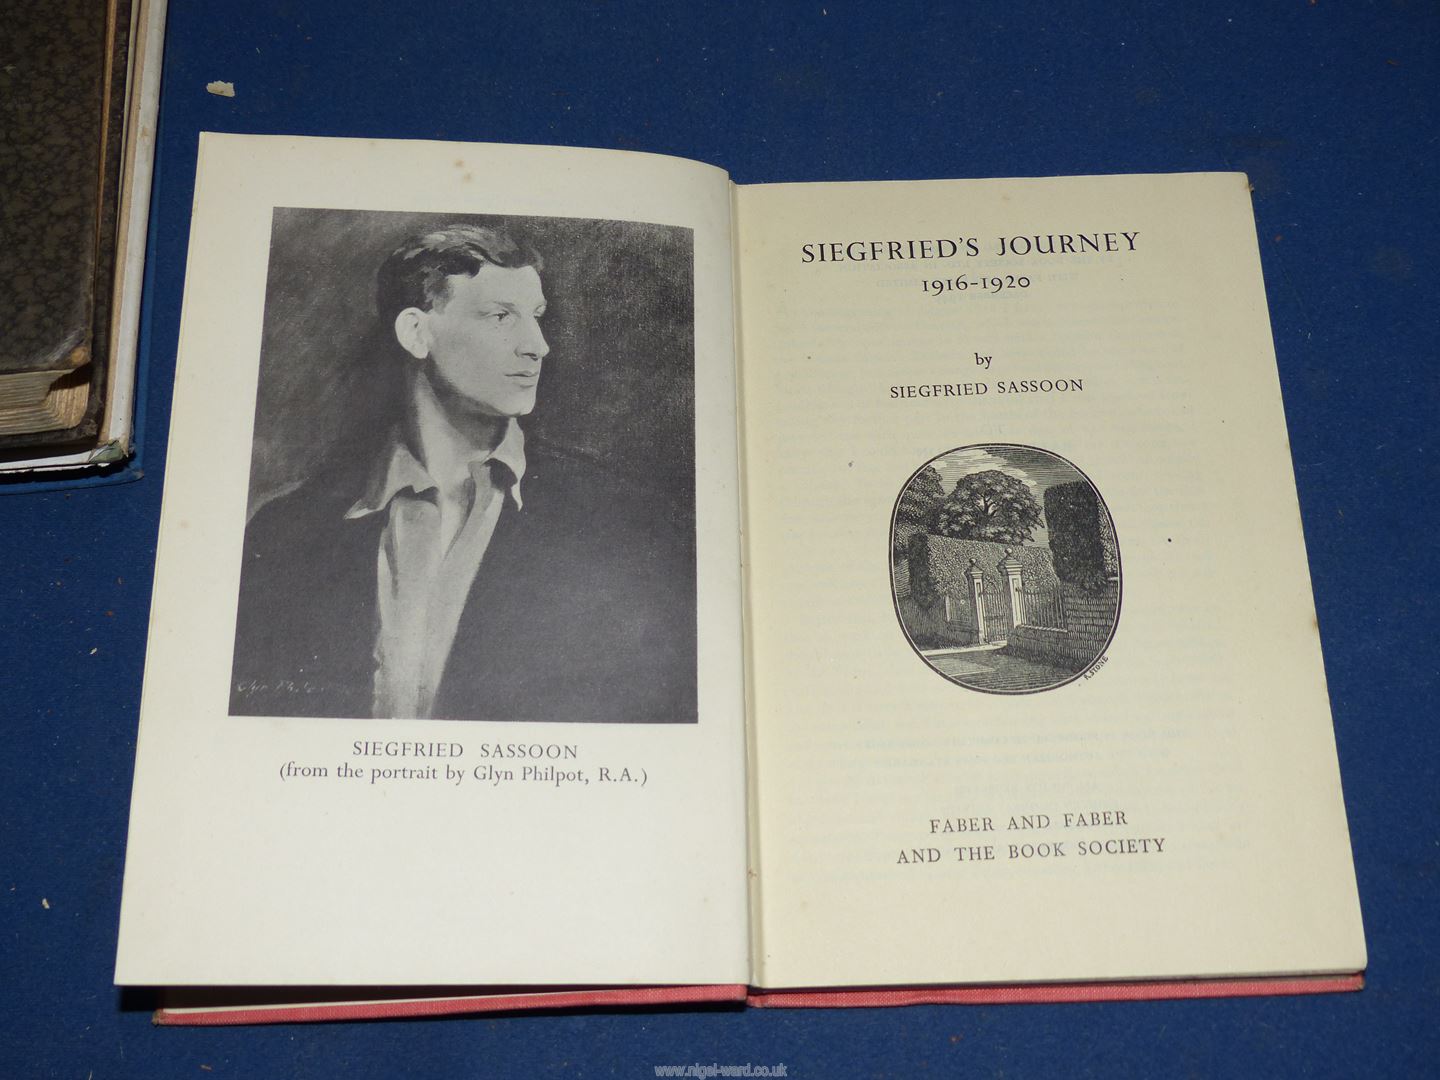 A small collection of works by Siegfried Sassoon including Memoirs of a Fox-Hunting Gentleman - Image 18 of 29